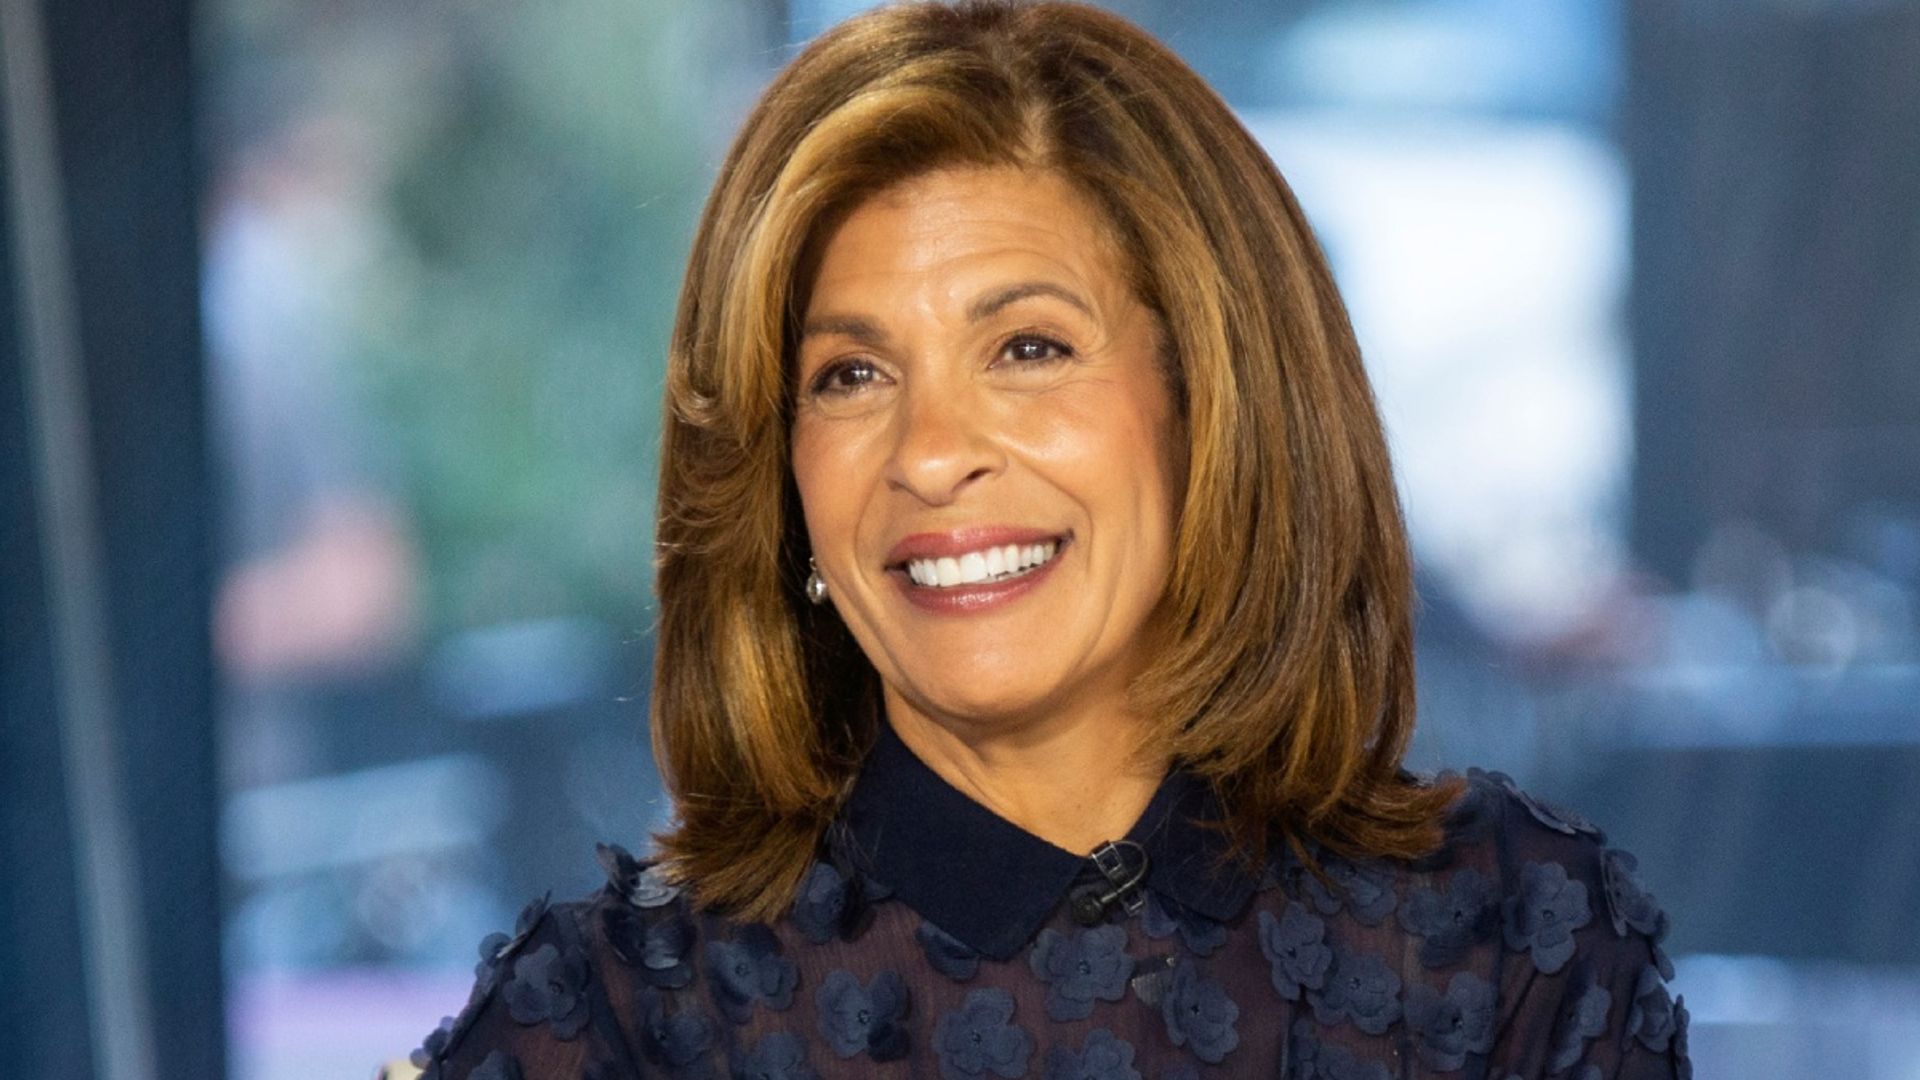 Hoda Kotb divides fans with her elaborate morning routine